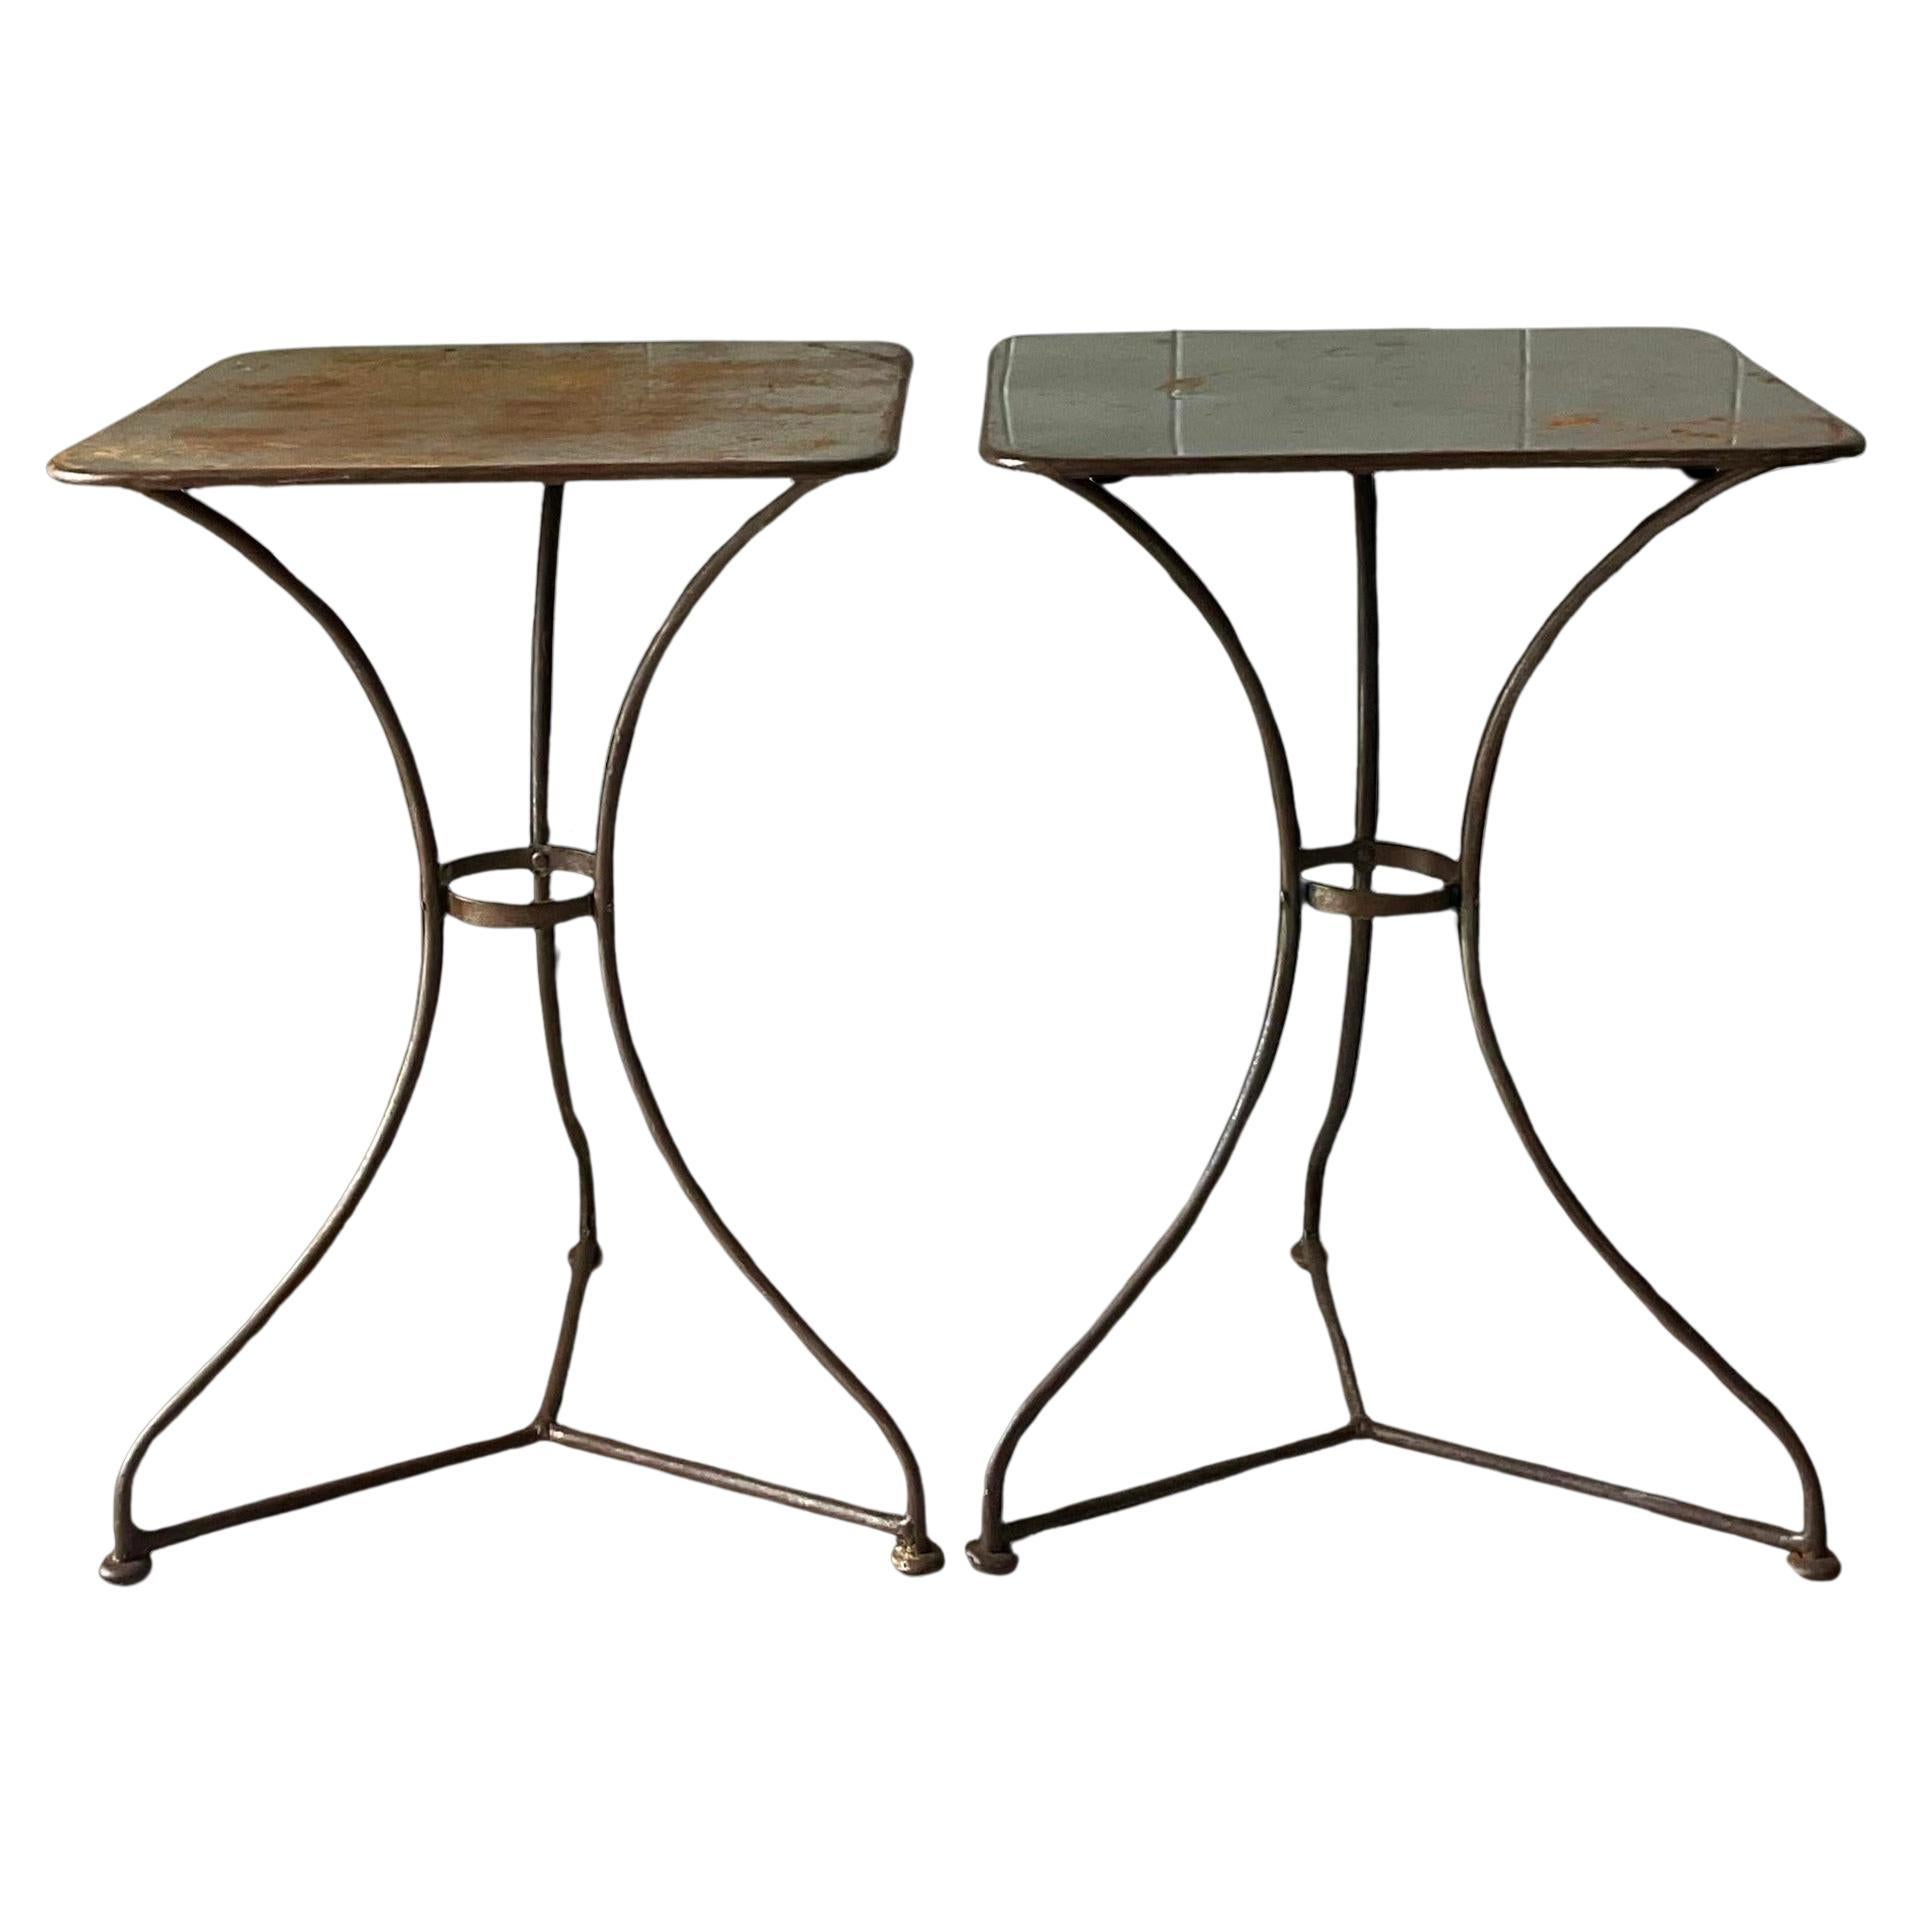 Late 20th Century Vintage Boho Patinated Metal Side Tables - a Pair For Sale